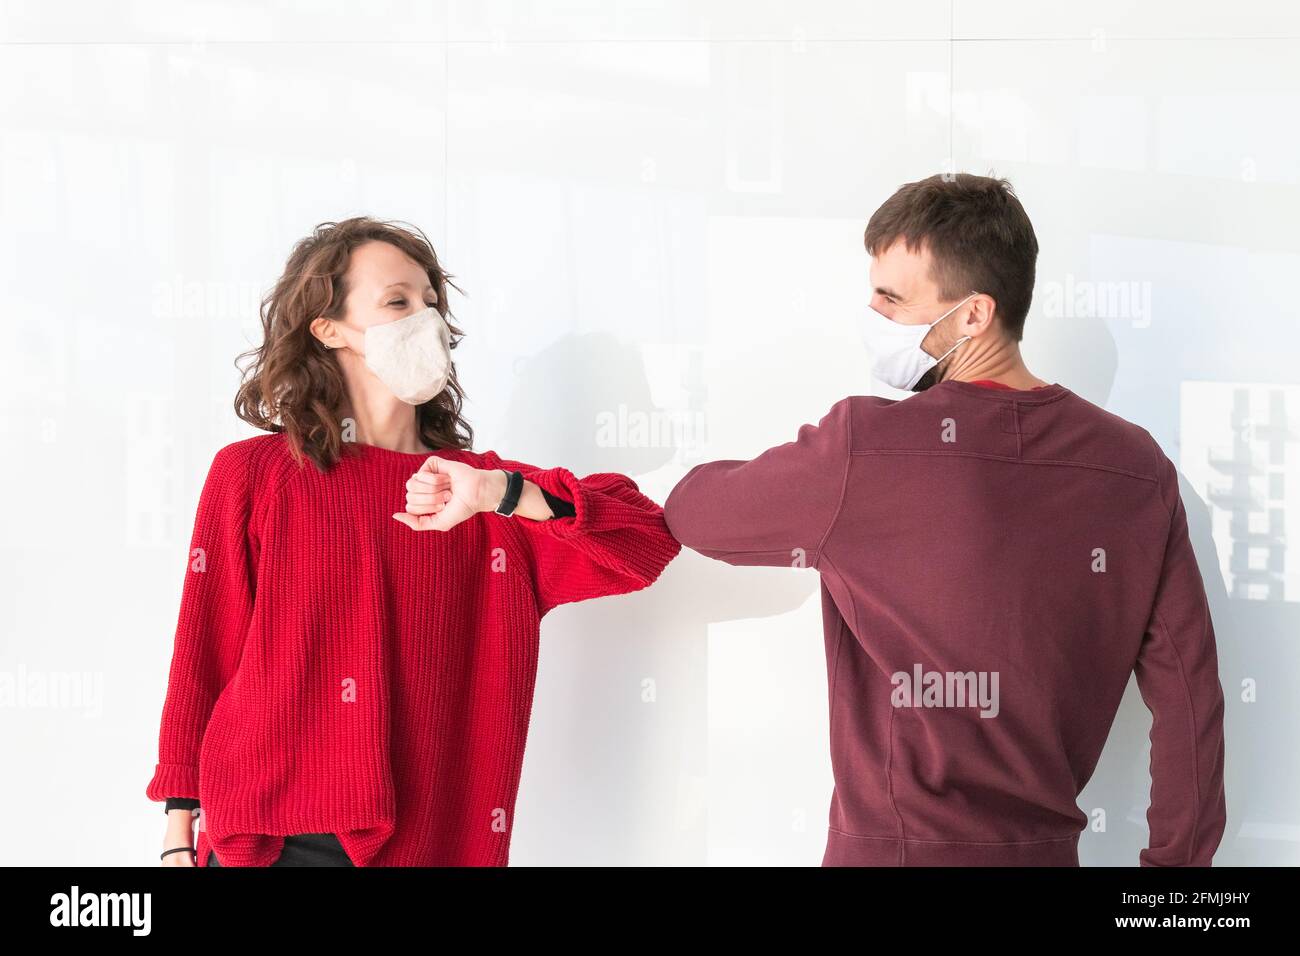 Two people greet elbow bump. Greeting with elbow bump in street. Colleagues are doing elbow bumps in office. New style of greeting during coronavirus. Stock Photo